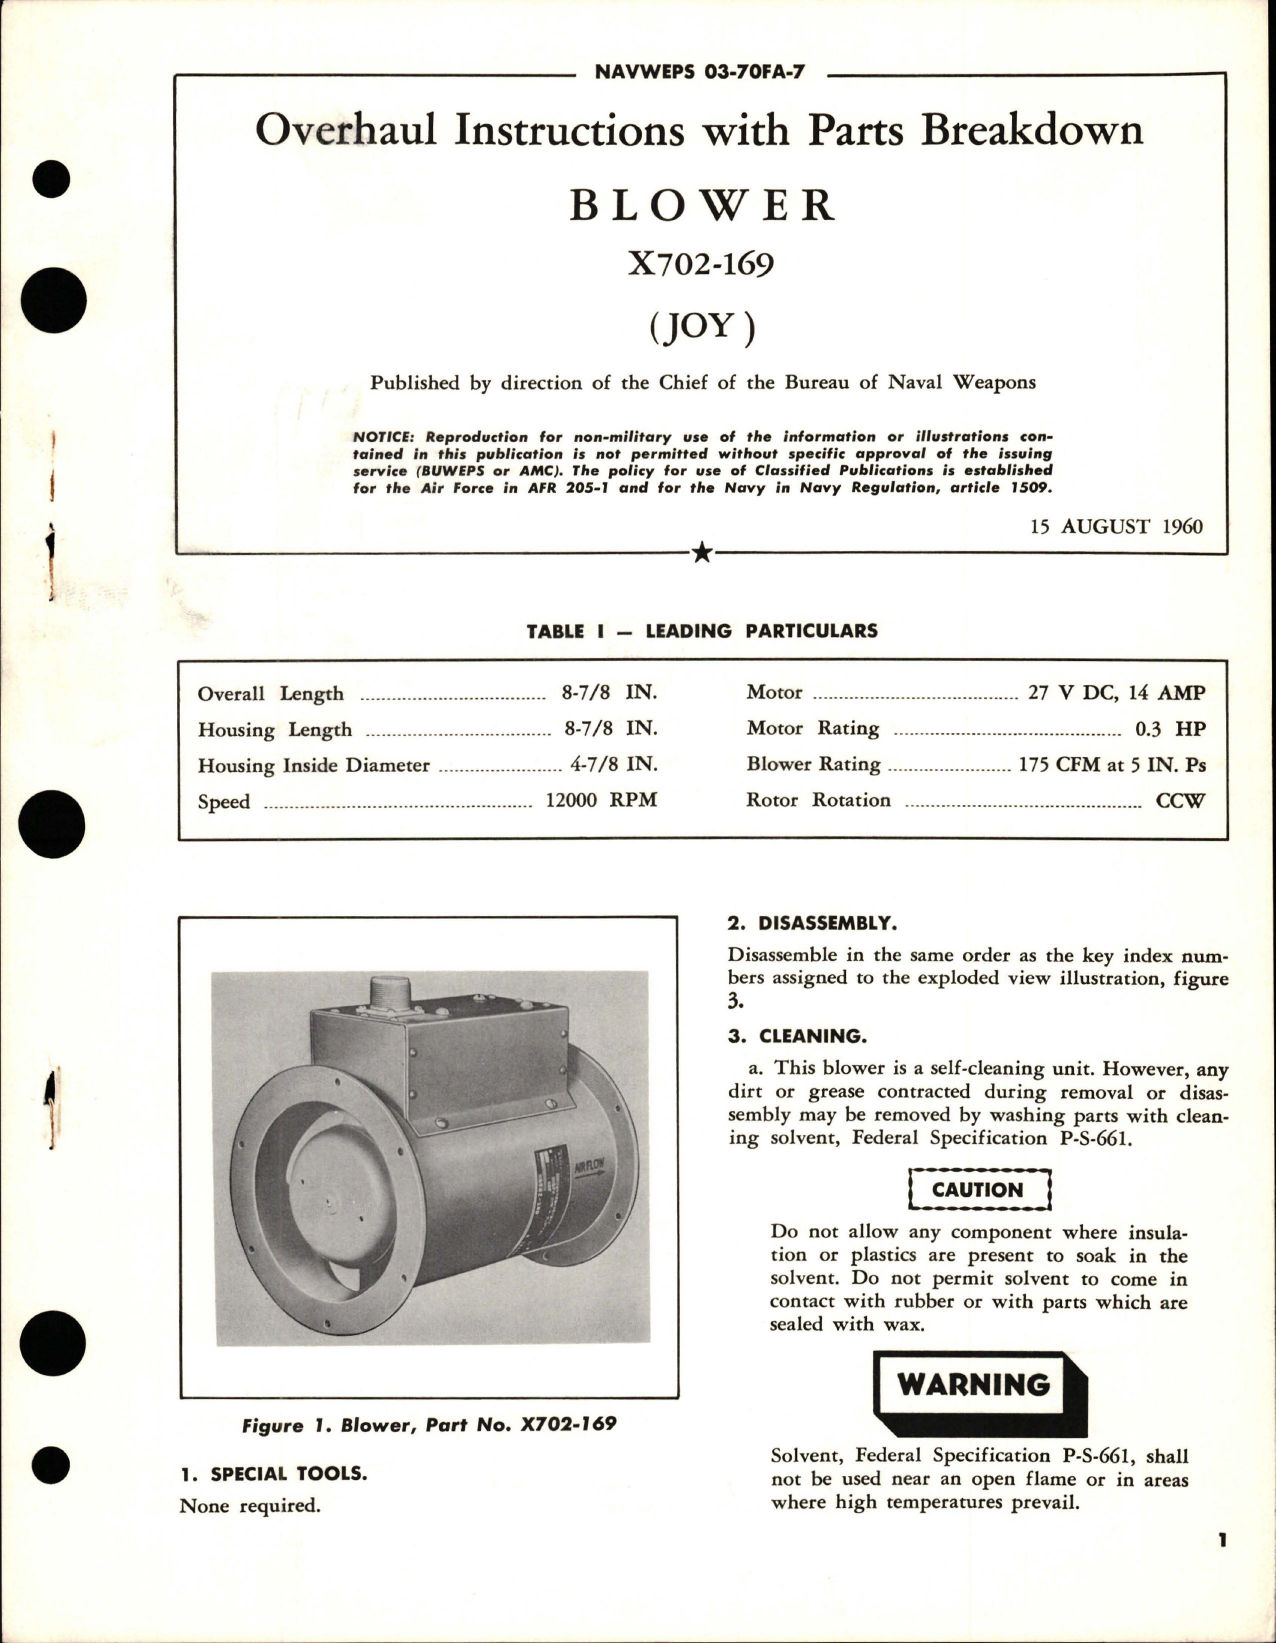 Sample page 1 from AirCorps Library document: Overhaul Instructions with Parts Breakdown for Blower - X702-169 